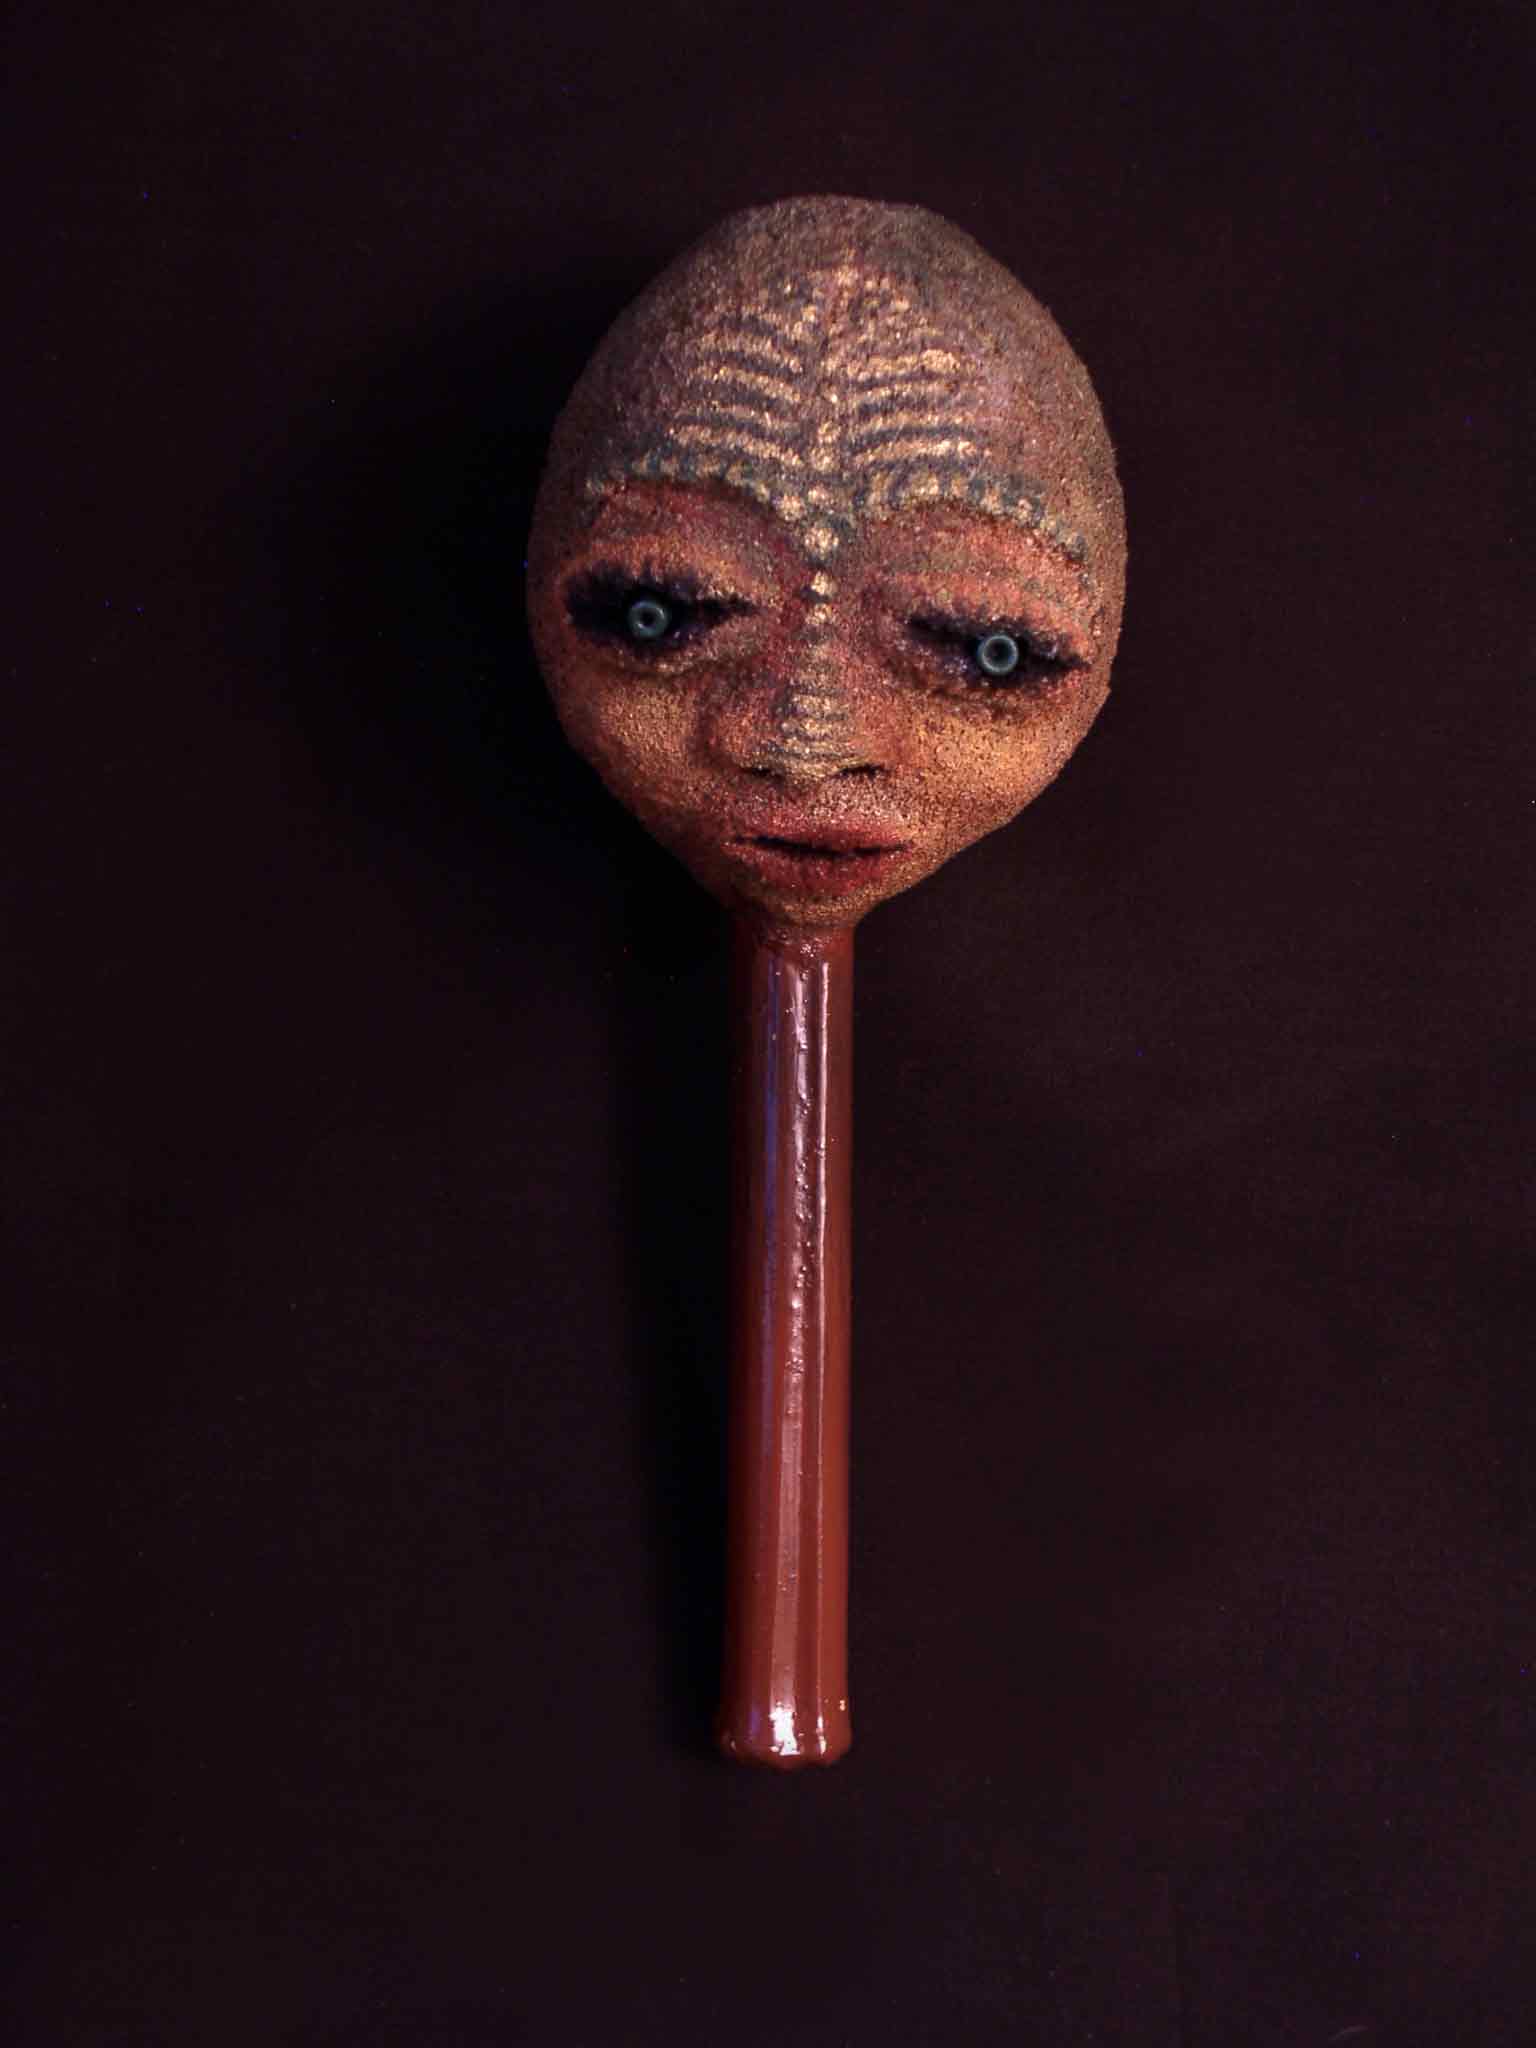 {Spirit Rattle by Gail Gulick}